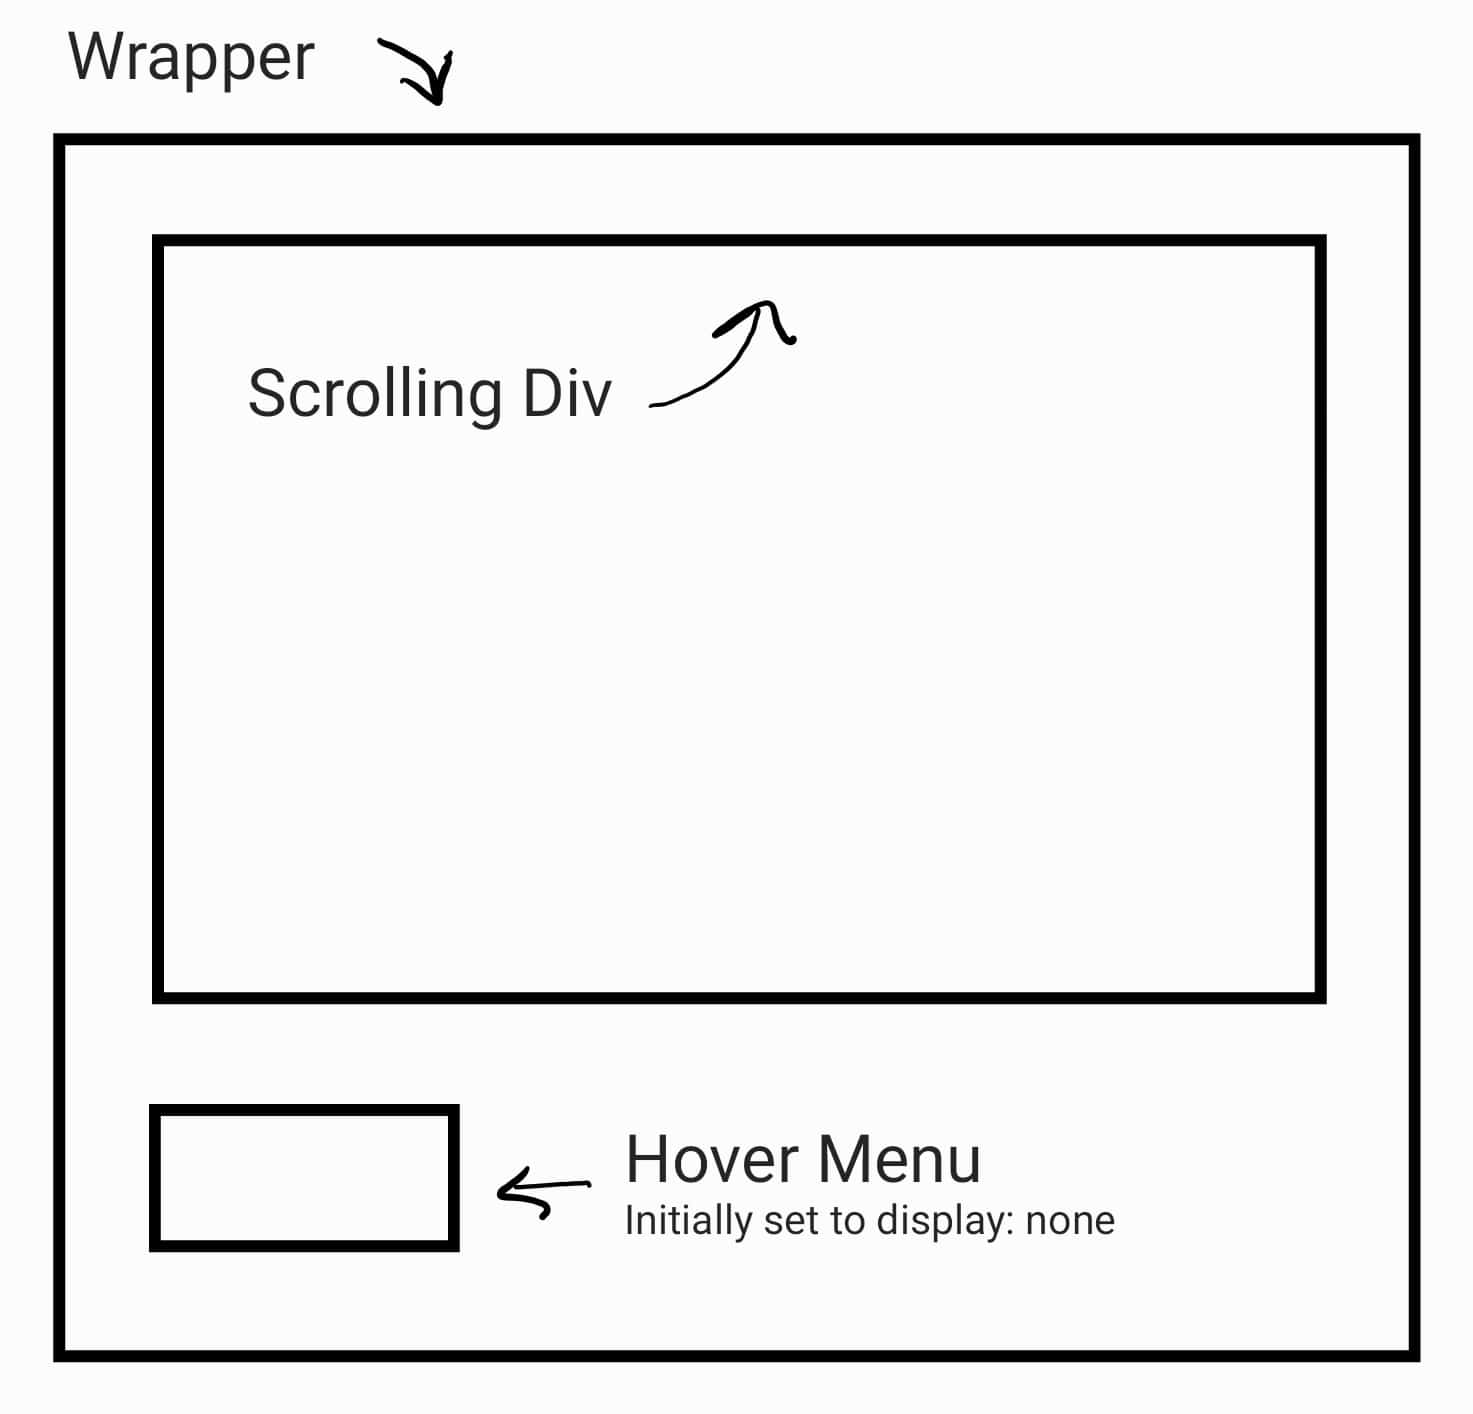 Diagram of HTML structure for the scrolling div with hover menu